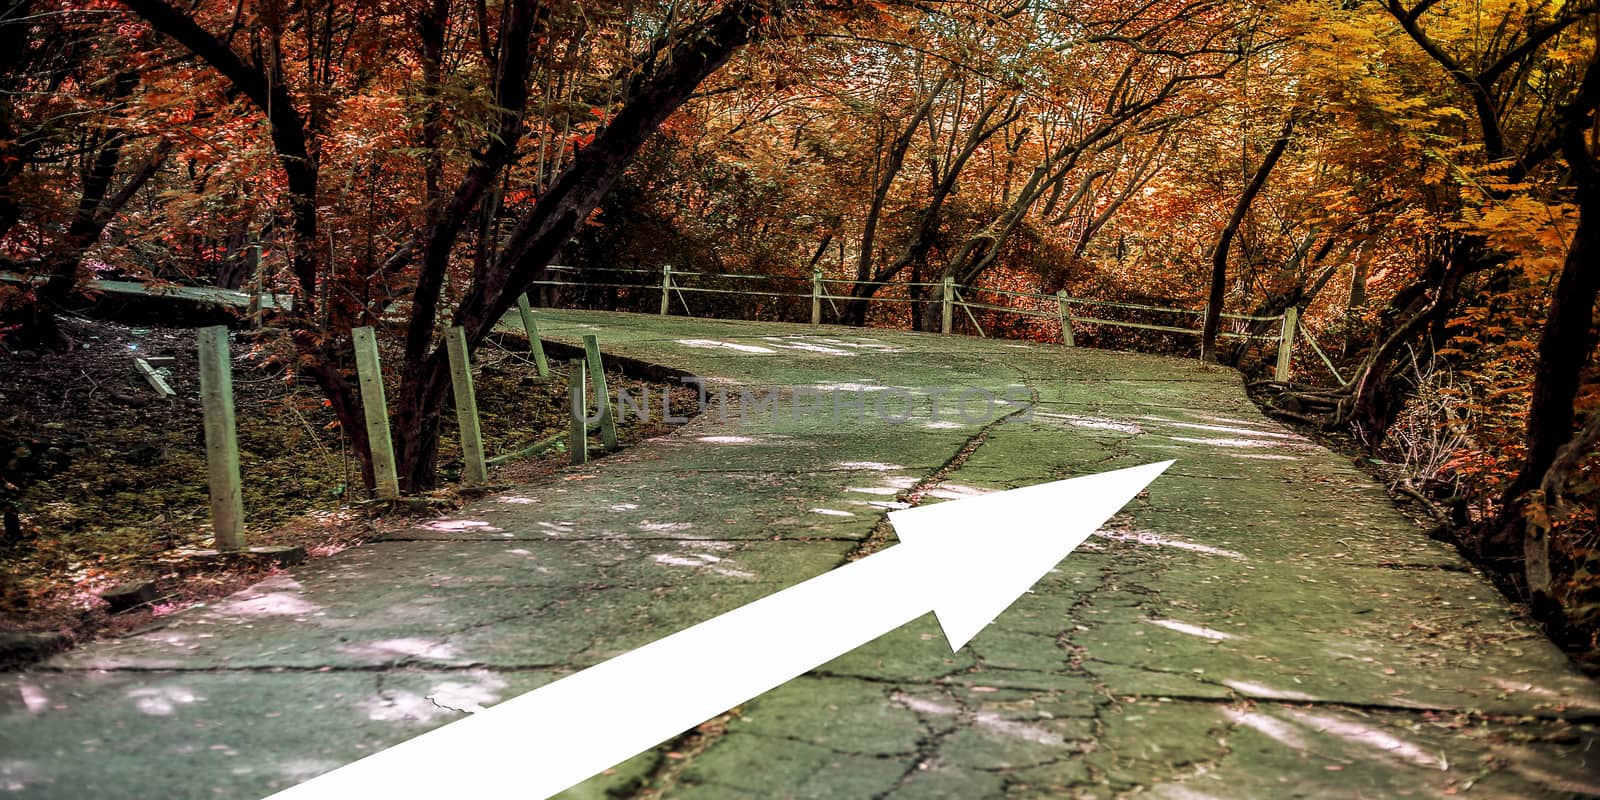 Autumnal forest. Landscape shot of road passing through the autumn forest with a white-colored arrow on it.